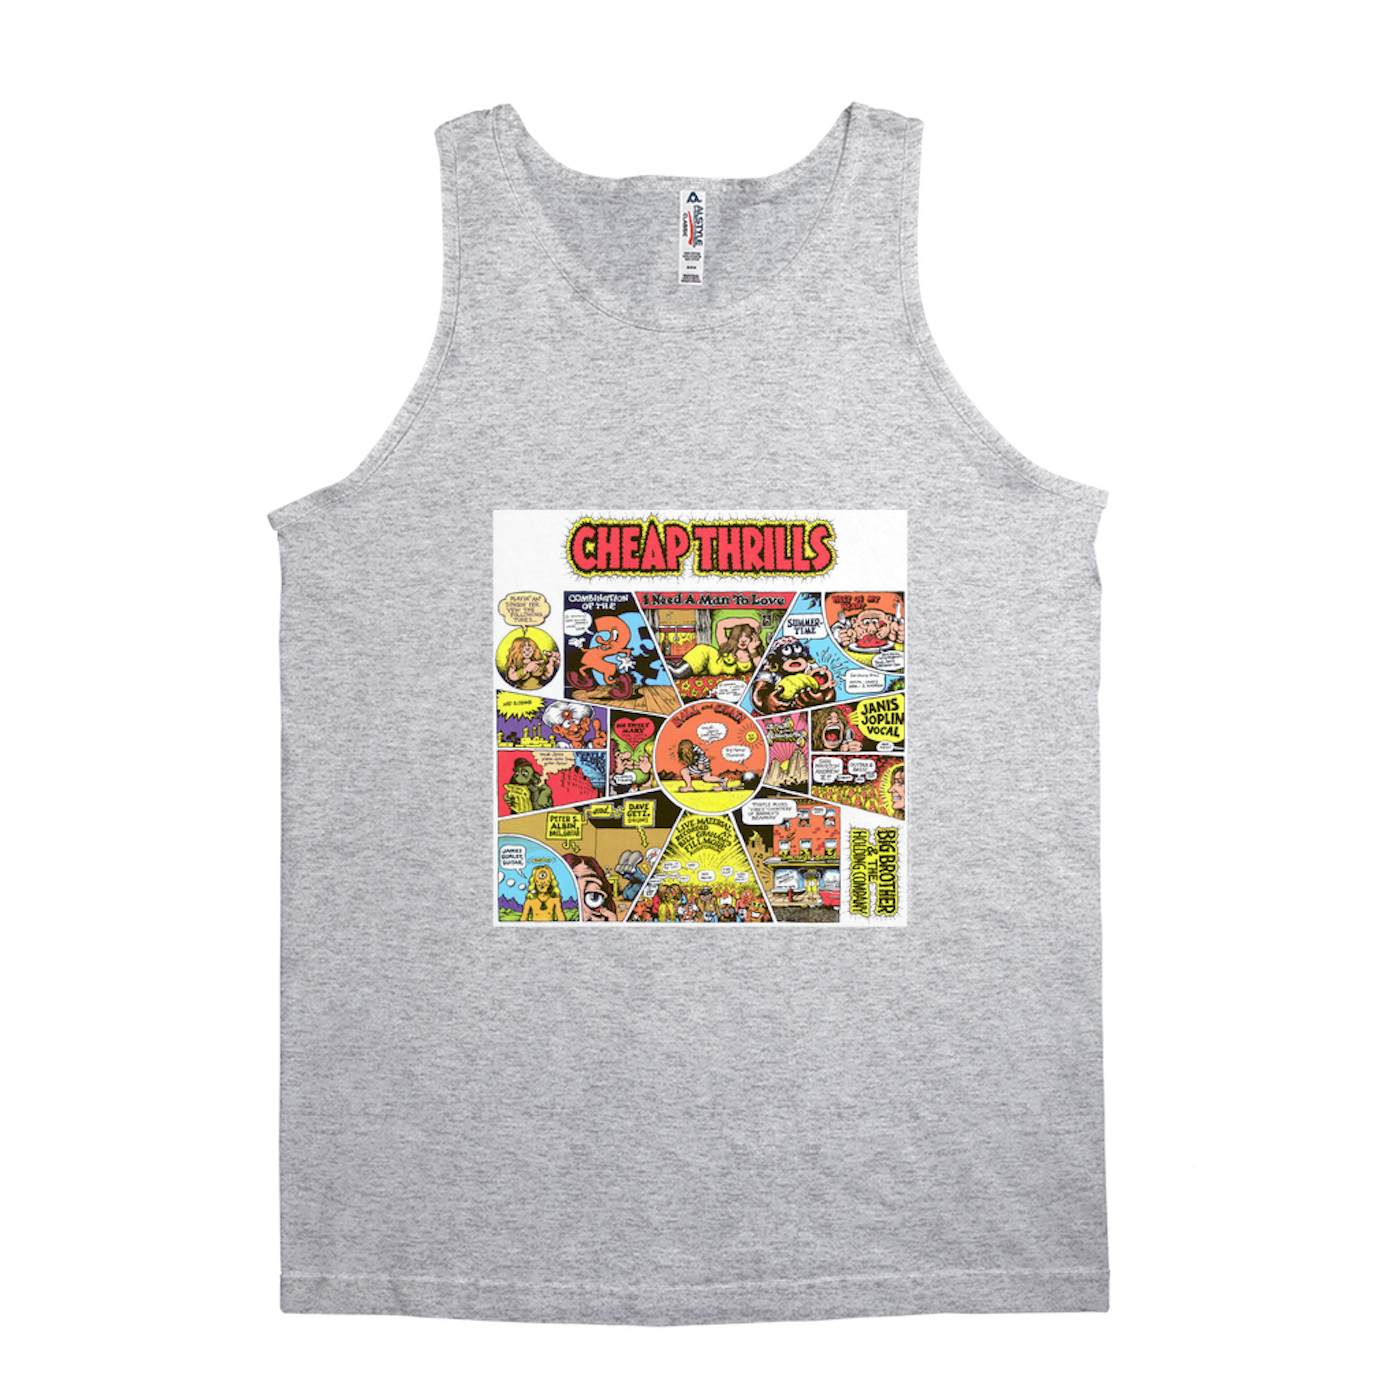 Big Brother & The Holding Company Unisex Tank Top | Cheap Thrills Album Design Big Brother and The Holding Company Shirt